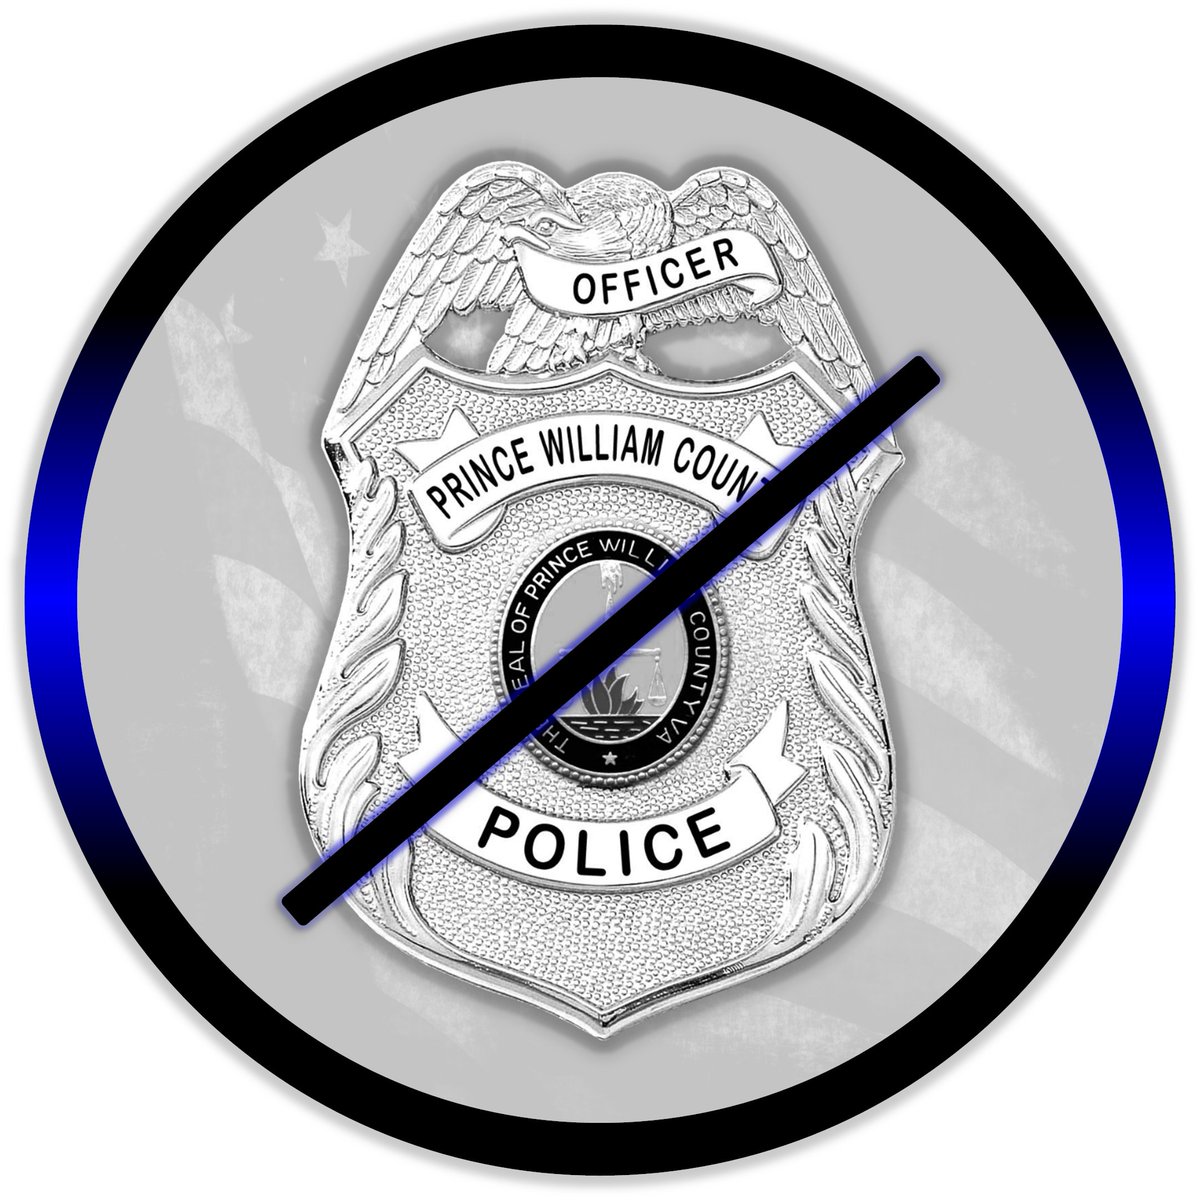 #PWCPD sends our deepest condolences to the community of Charlotte, N.C. To the families & friends of the law enforcement officers of @USMarshalsHQ & @CMPD, know our hearts & thoughts are with you now & in the days to come. To those injured, we send prayers for complete recovery.